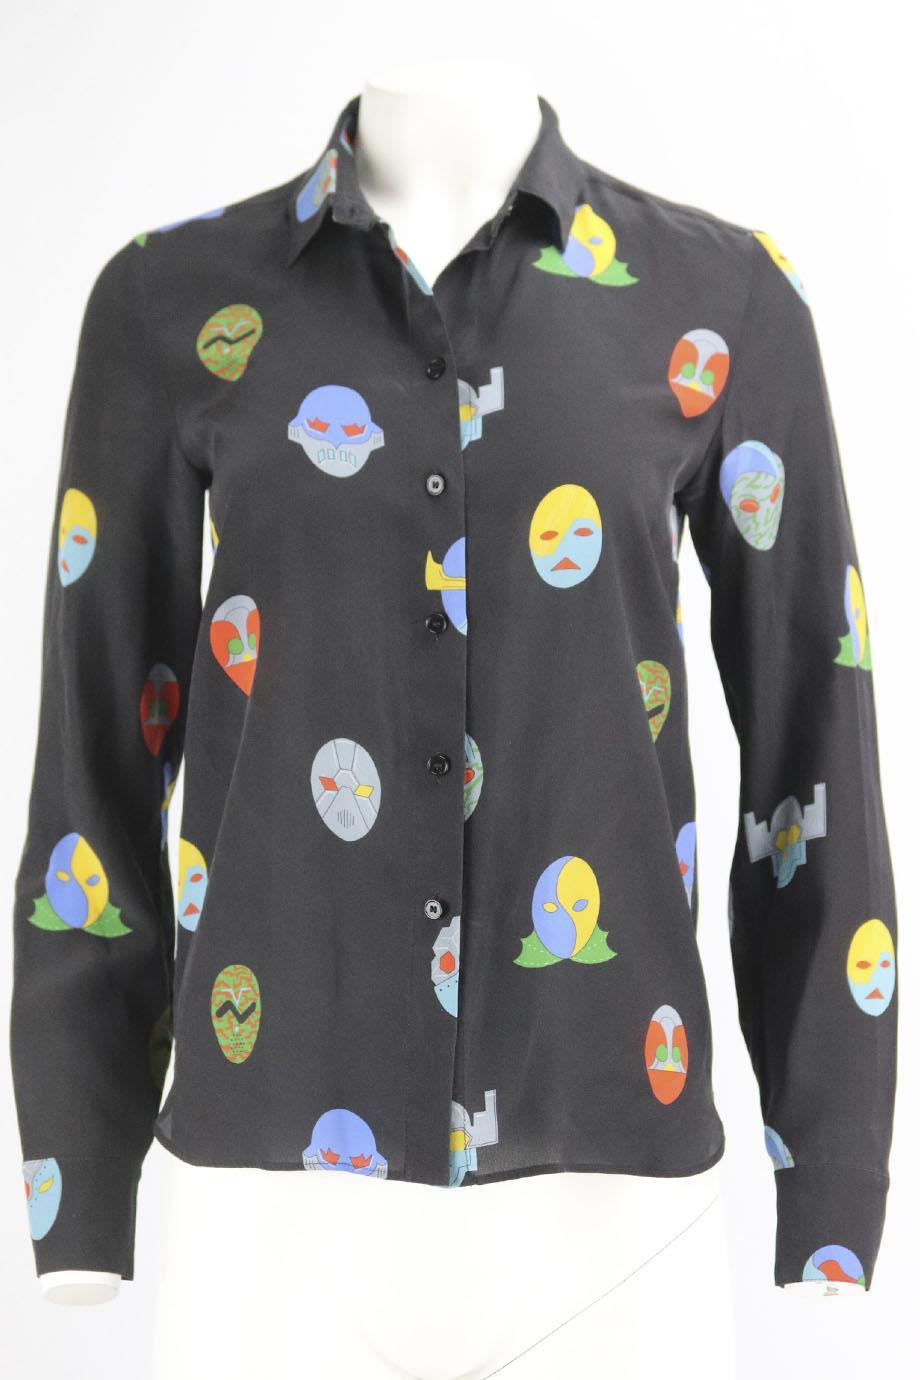 Stella McCartney printed silk shirt. Multicoloured. Long sleeve, v-neck. Button fastening at front. 100% Silk. Size: IT 40 (UK 8, US 4, FR 36 ). Bust: 36 in. Waist: 37 in. Hips: 37 in. Length: 27.25 in Very good condition - Marks to interior lining;